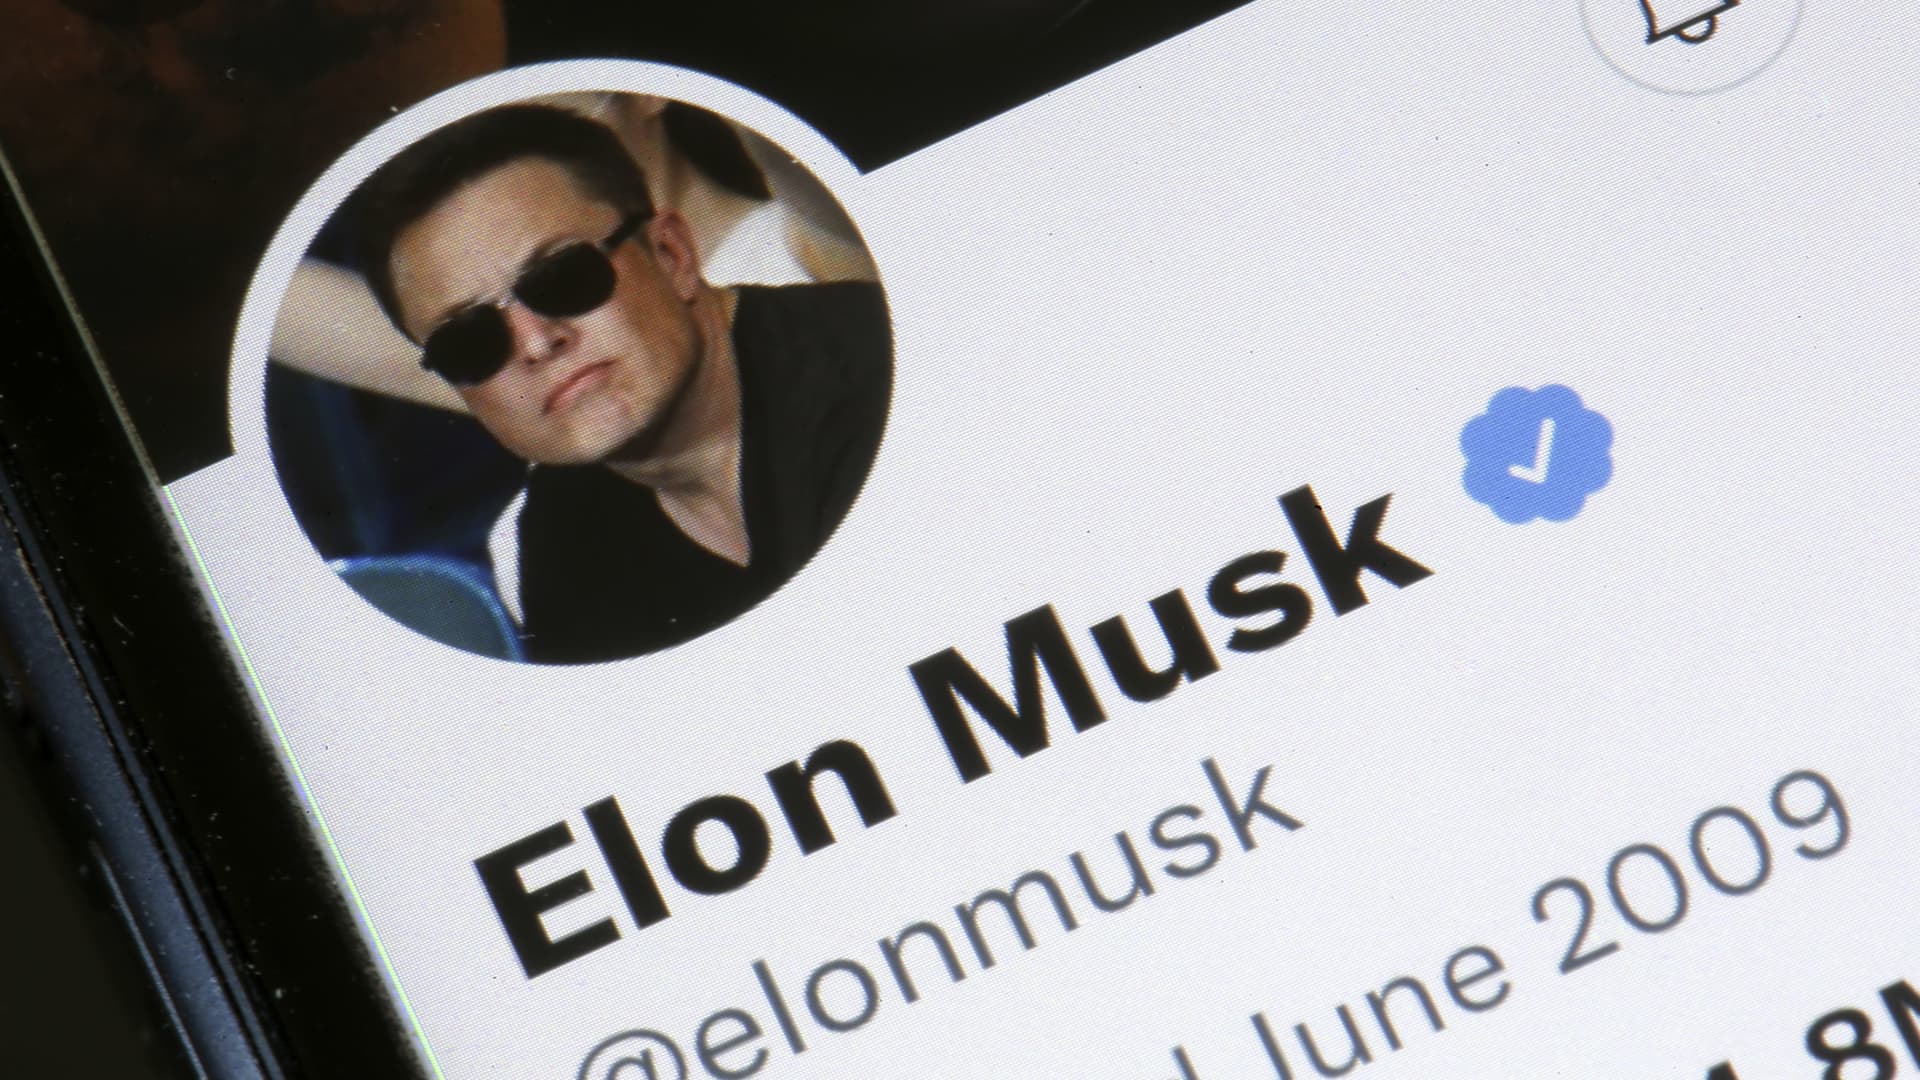 Elon Musk has wrong approach to count fakes, spam on Twitter: experts